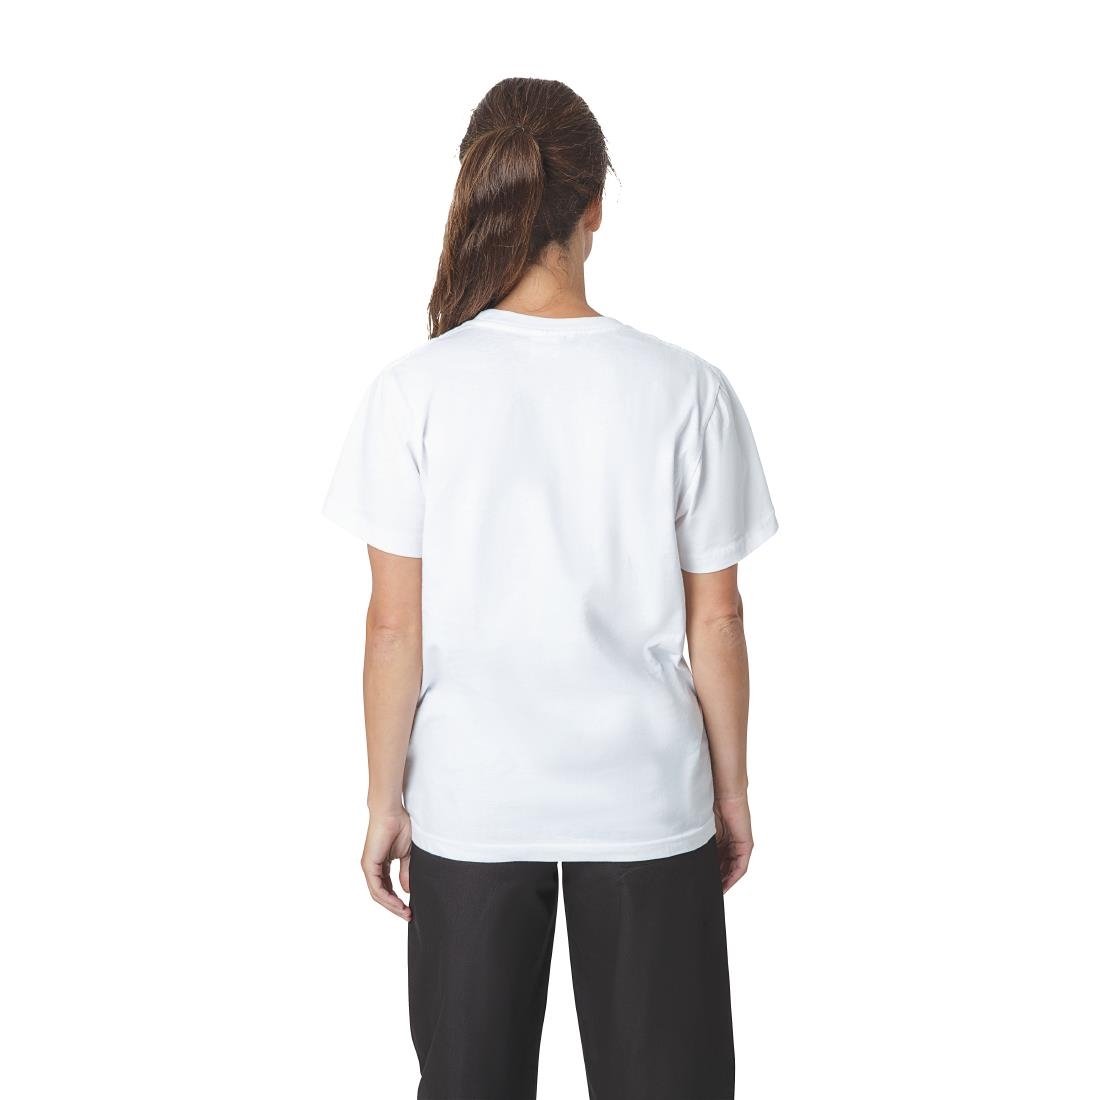 A103-L Unisex Chef T-Shirt White L JD Catering Equipment Solutions Ltd